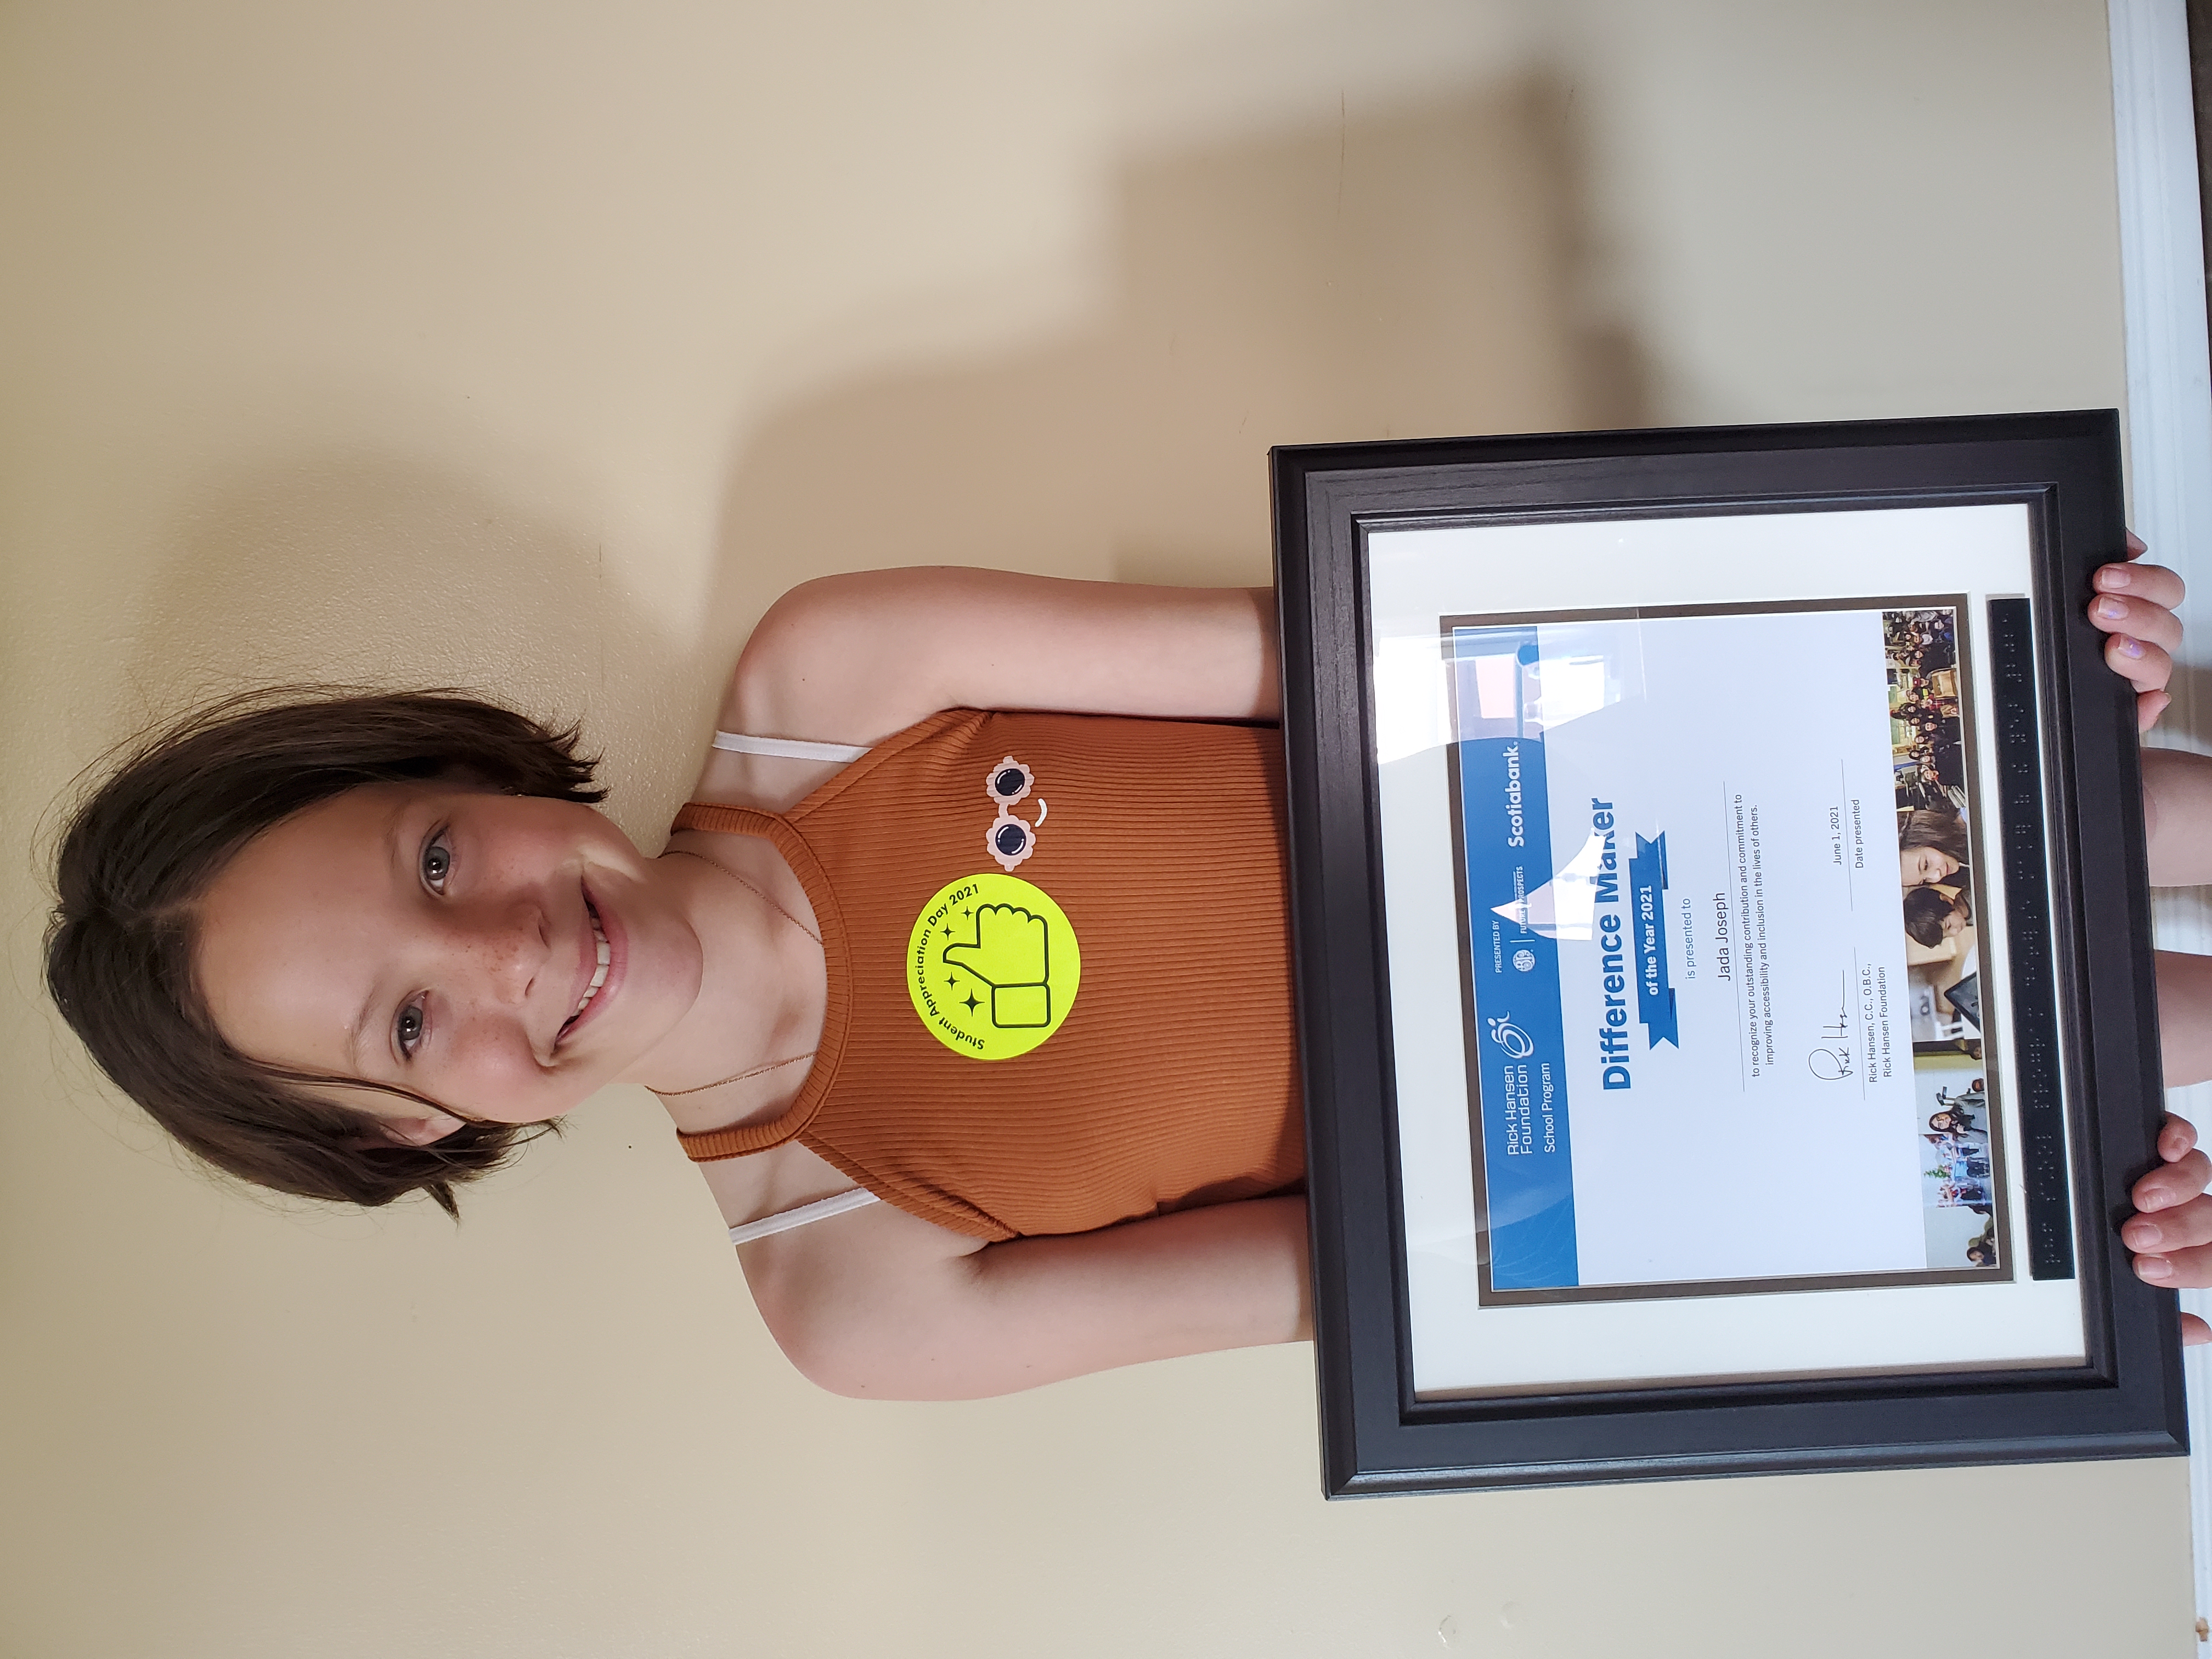 young girl holds a difference maker award certificate in a frame